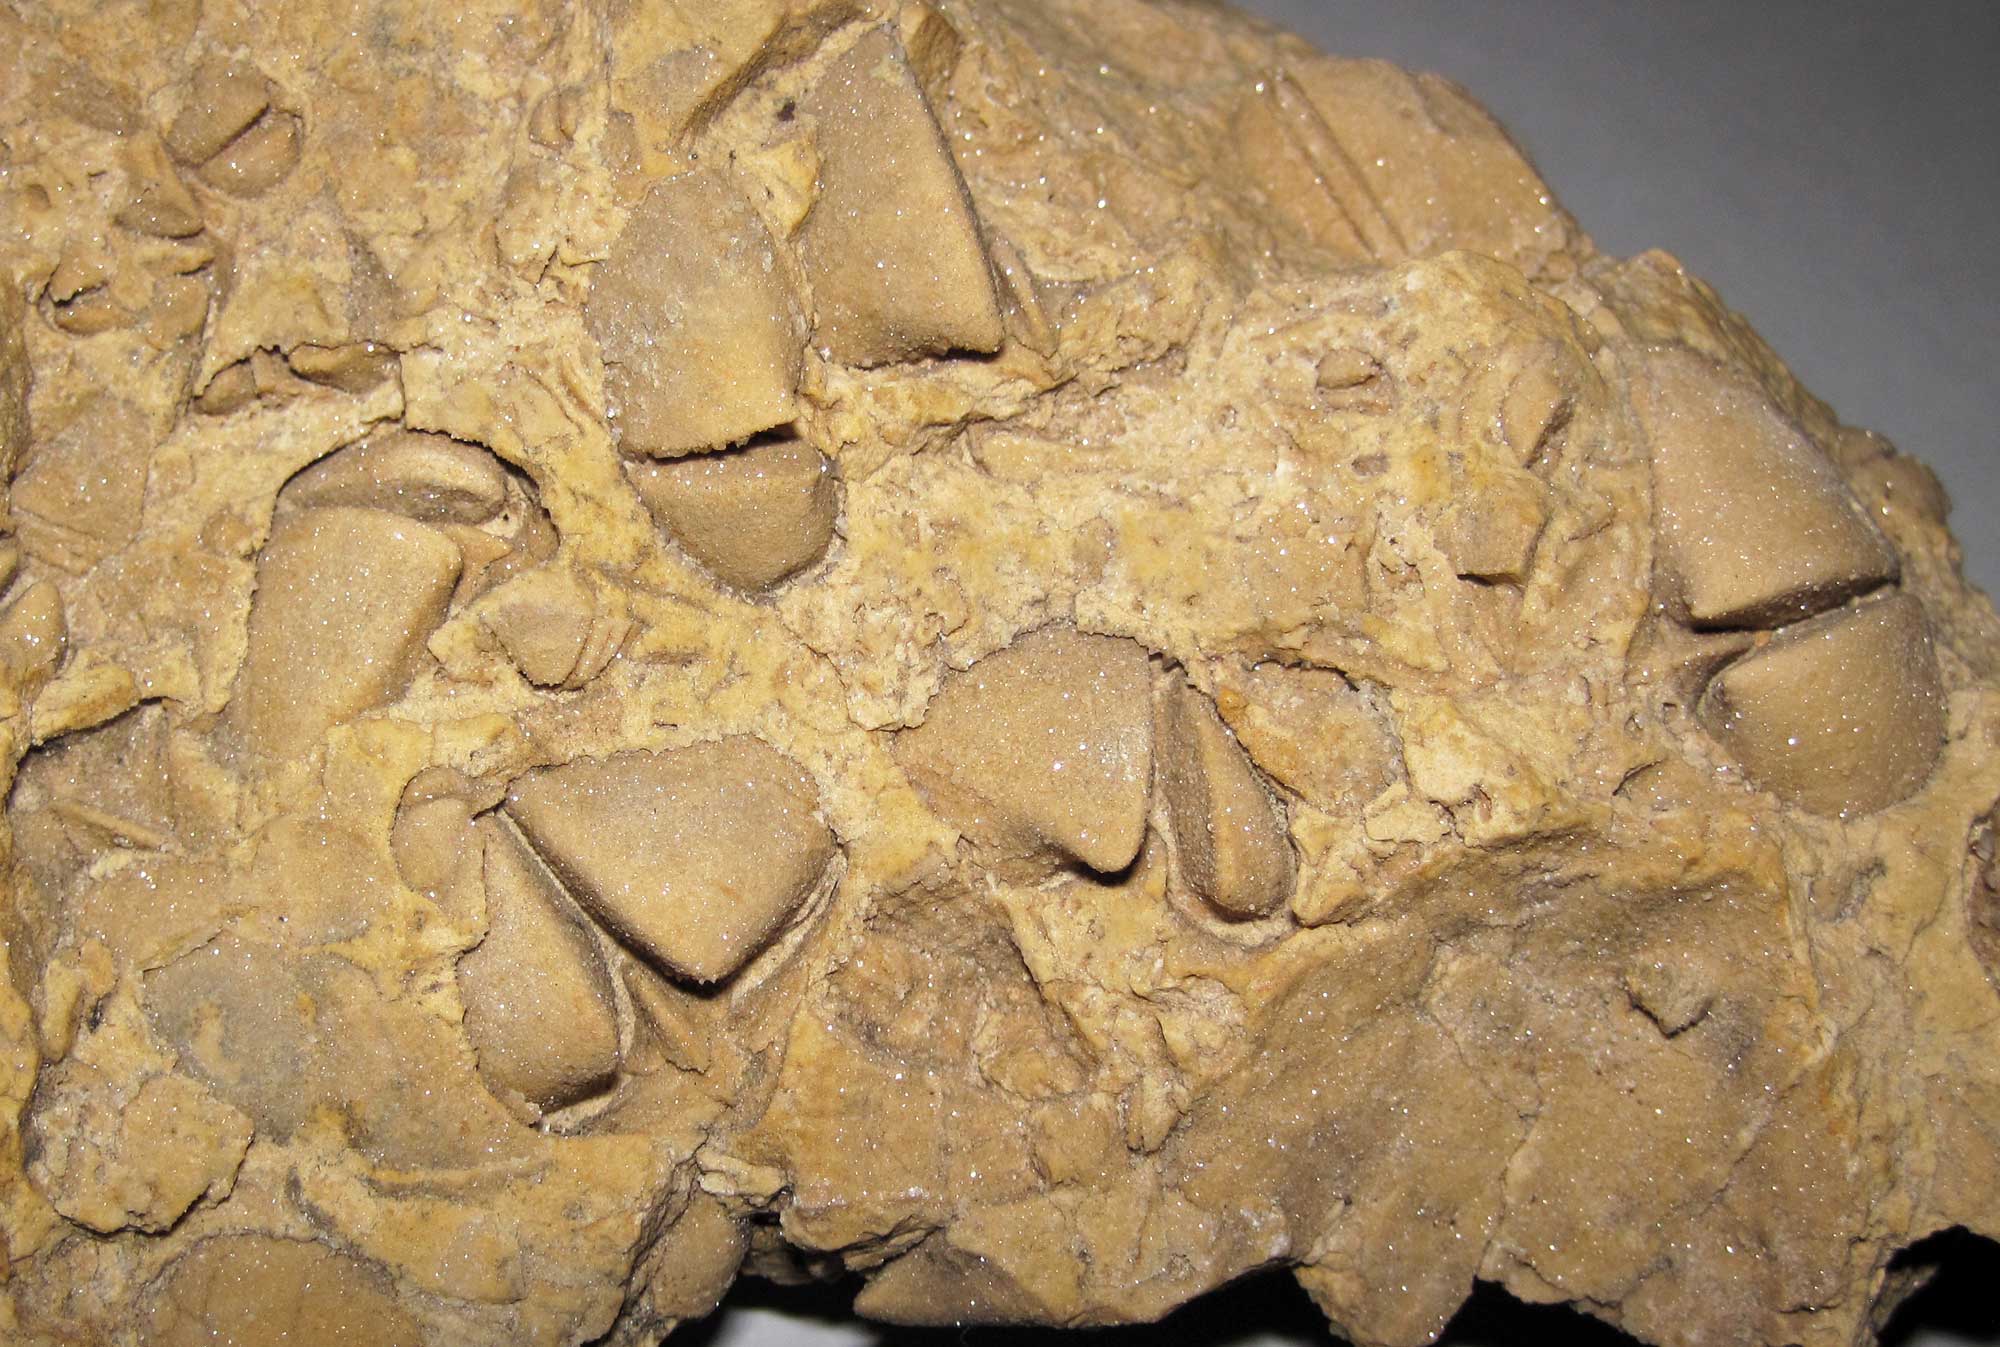 Photograph of internal molds of pentamerid brachiopods from the silurian of Illinois. The photo shows a yellowish rock with internal molds on its surface. The molds appear beak-like.